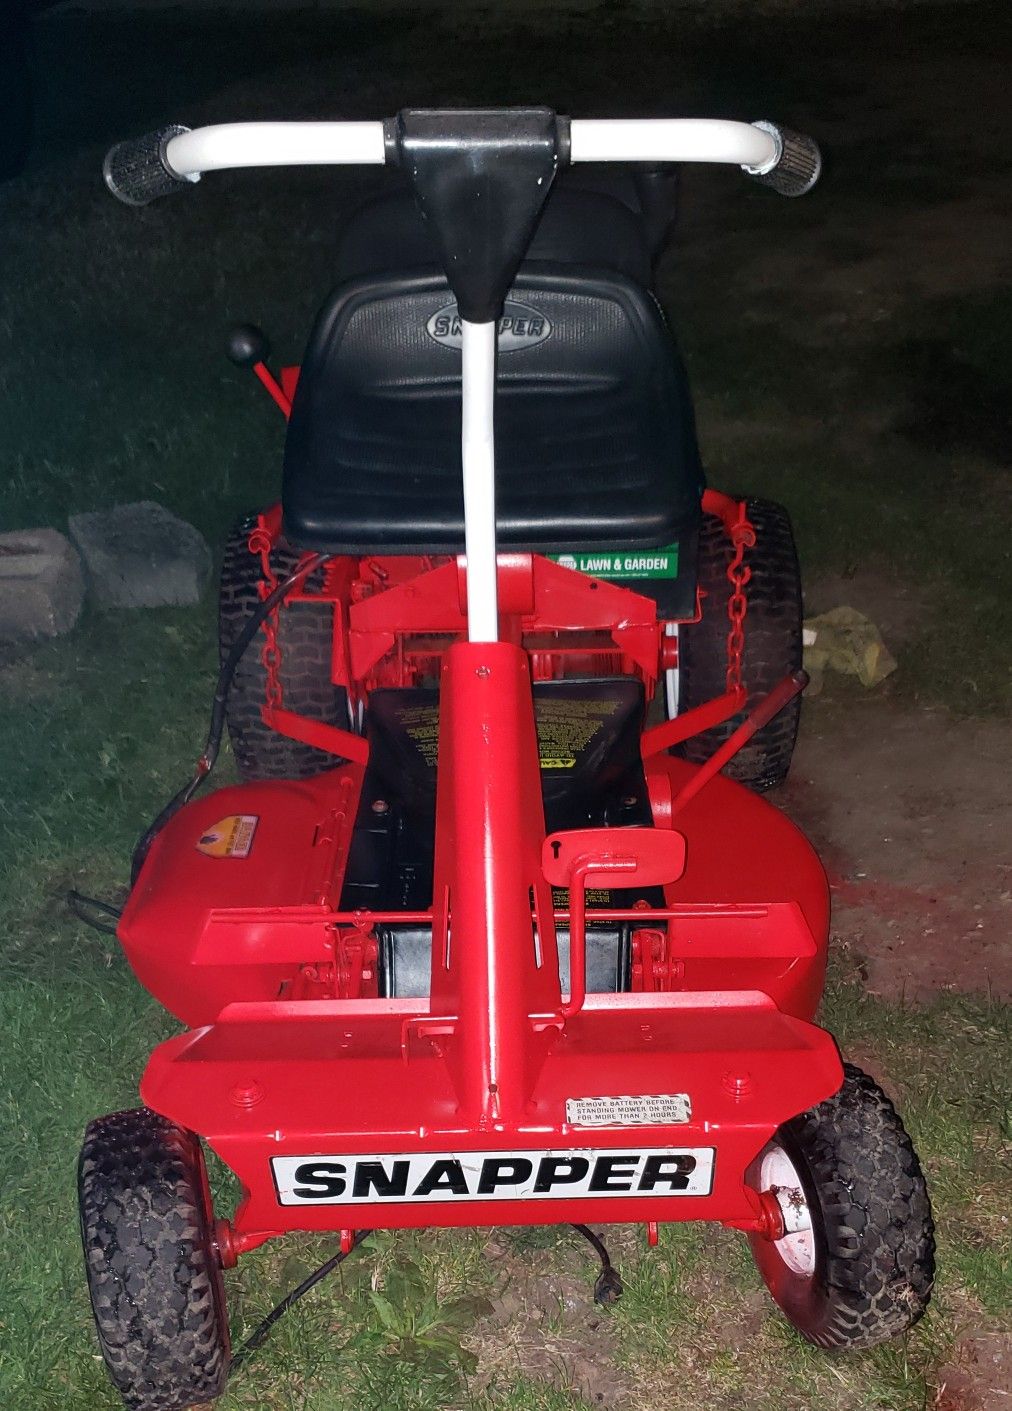 SNAPPER VINTAGE RIDING MOWER